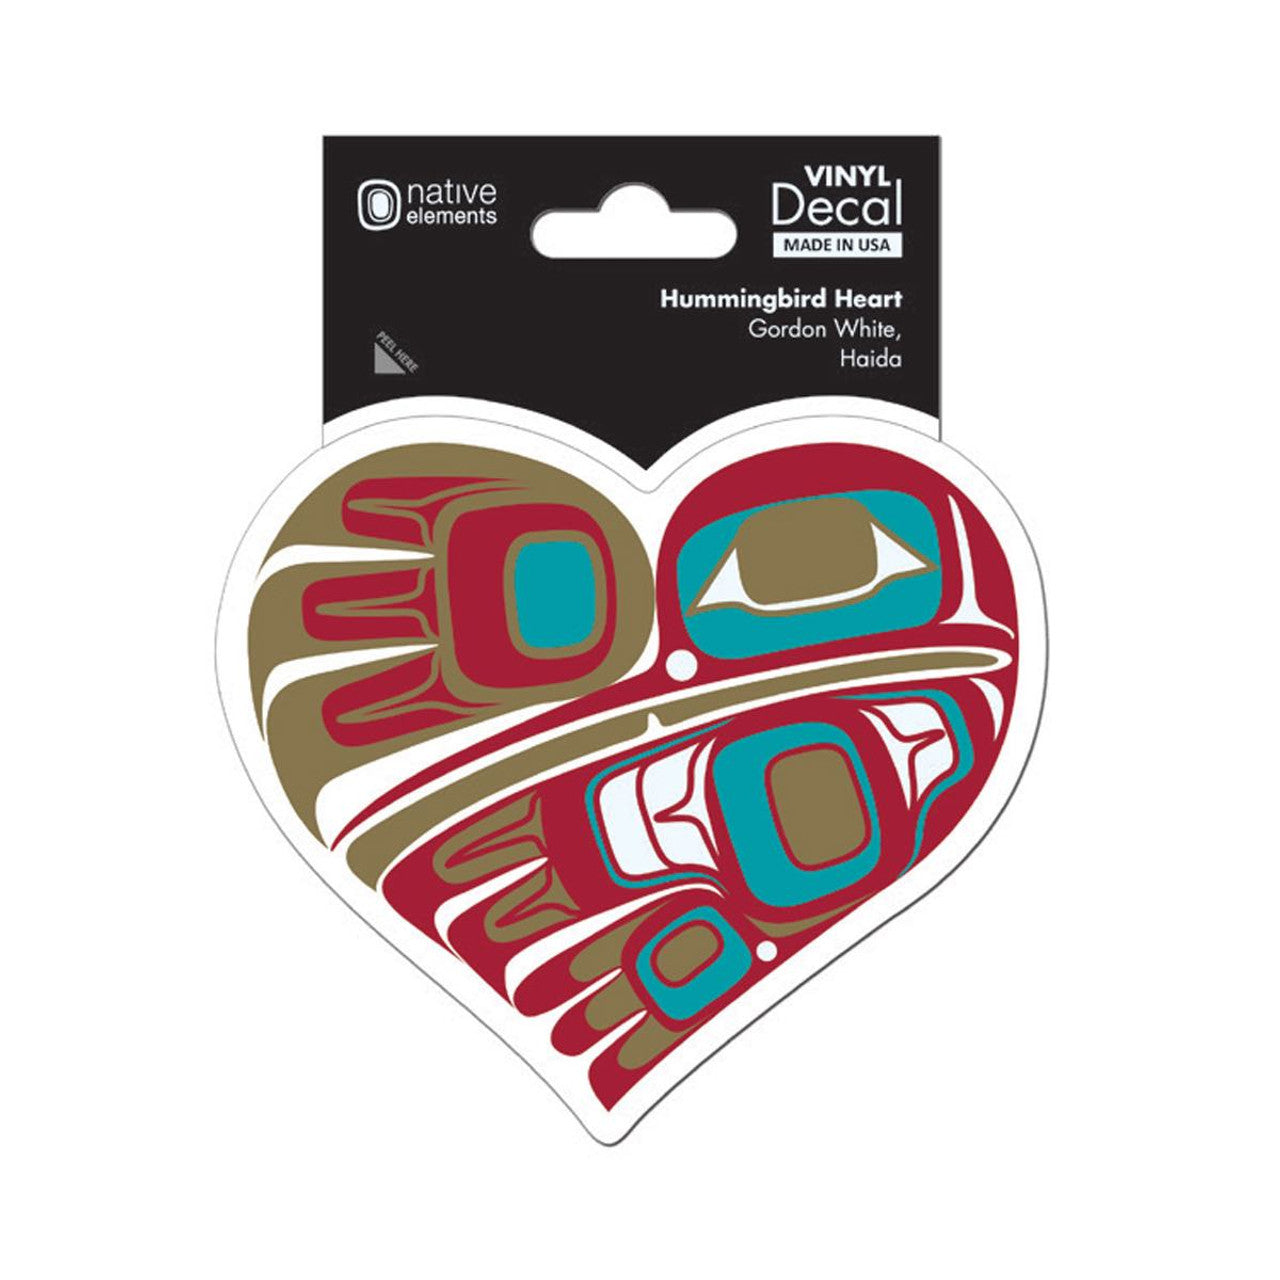 DECALS - Gordon White Hummingbird Heart - D217 - House of Himwitsa Native Art Gallery and Gifts